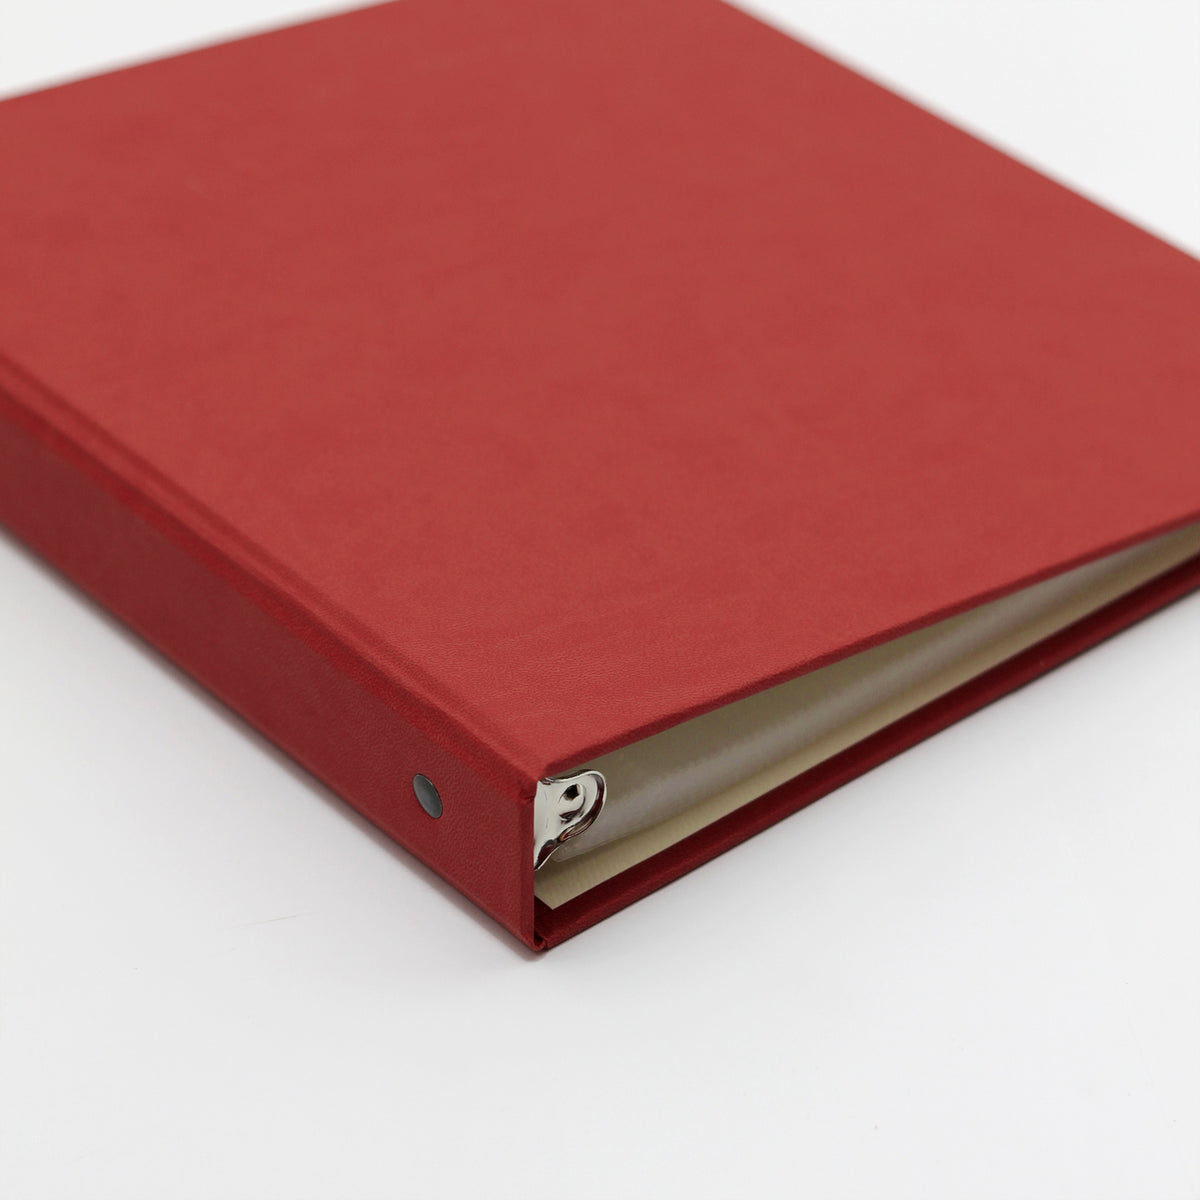 Large Photo Binder (for 4x6 photos) with Red Vegan Leather Cover